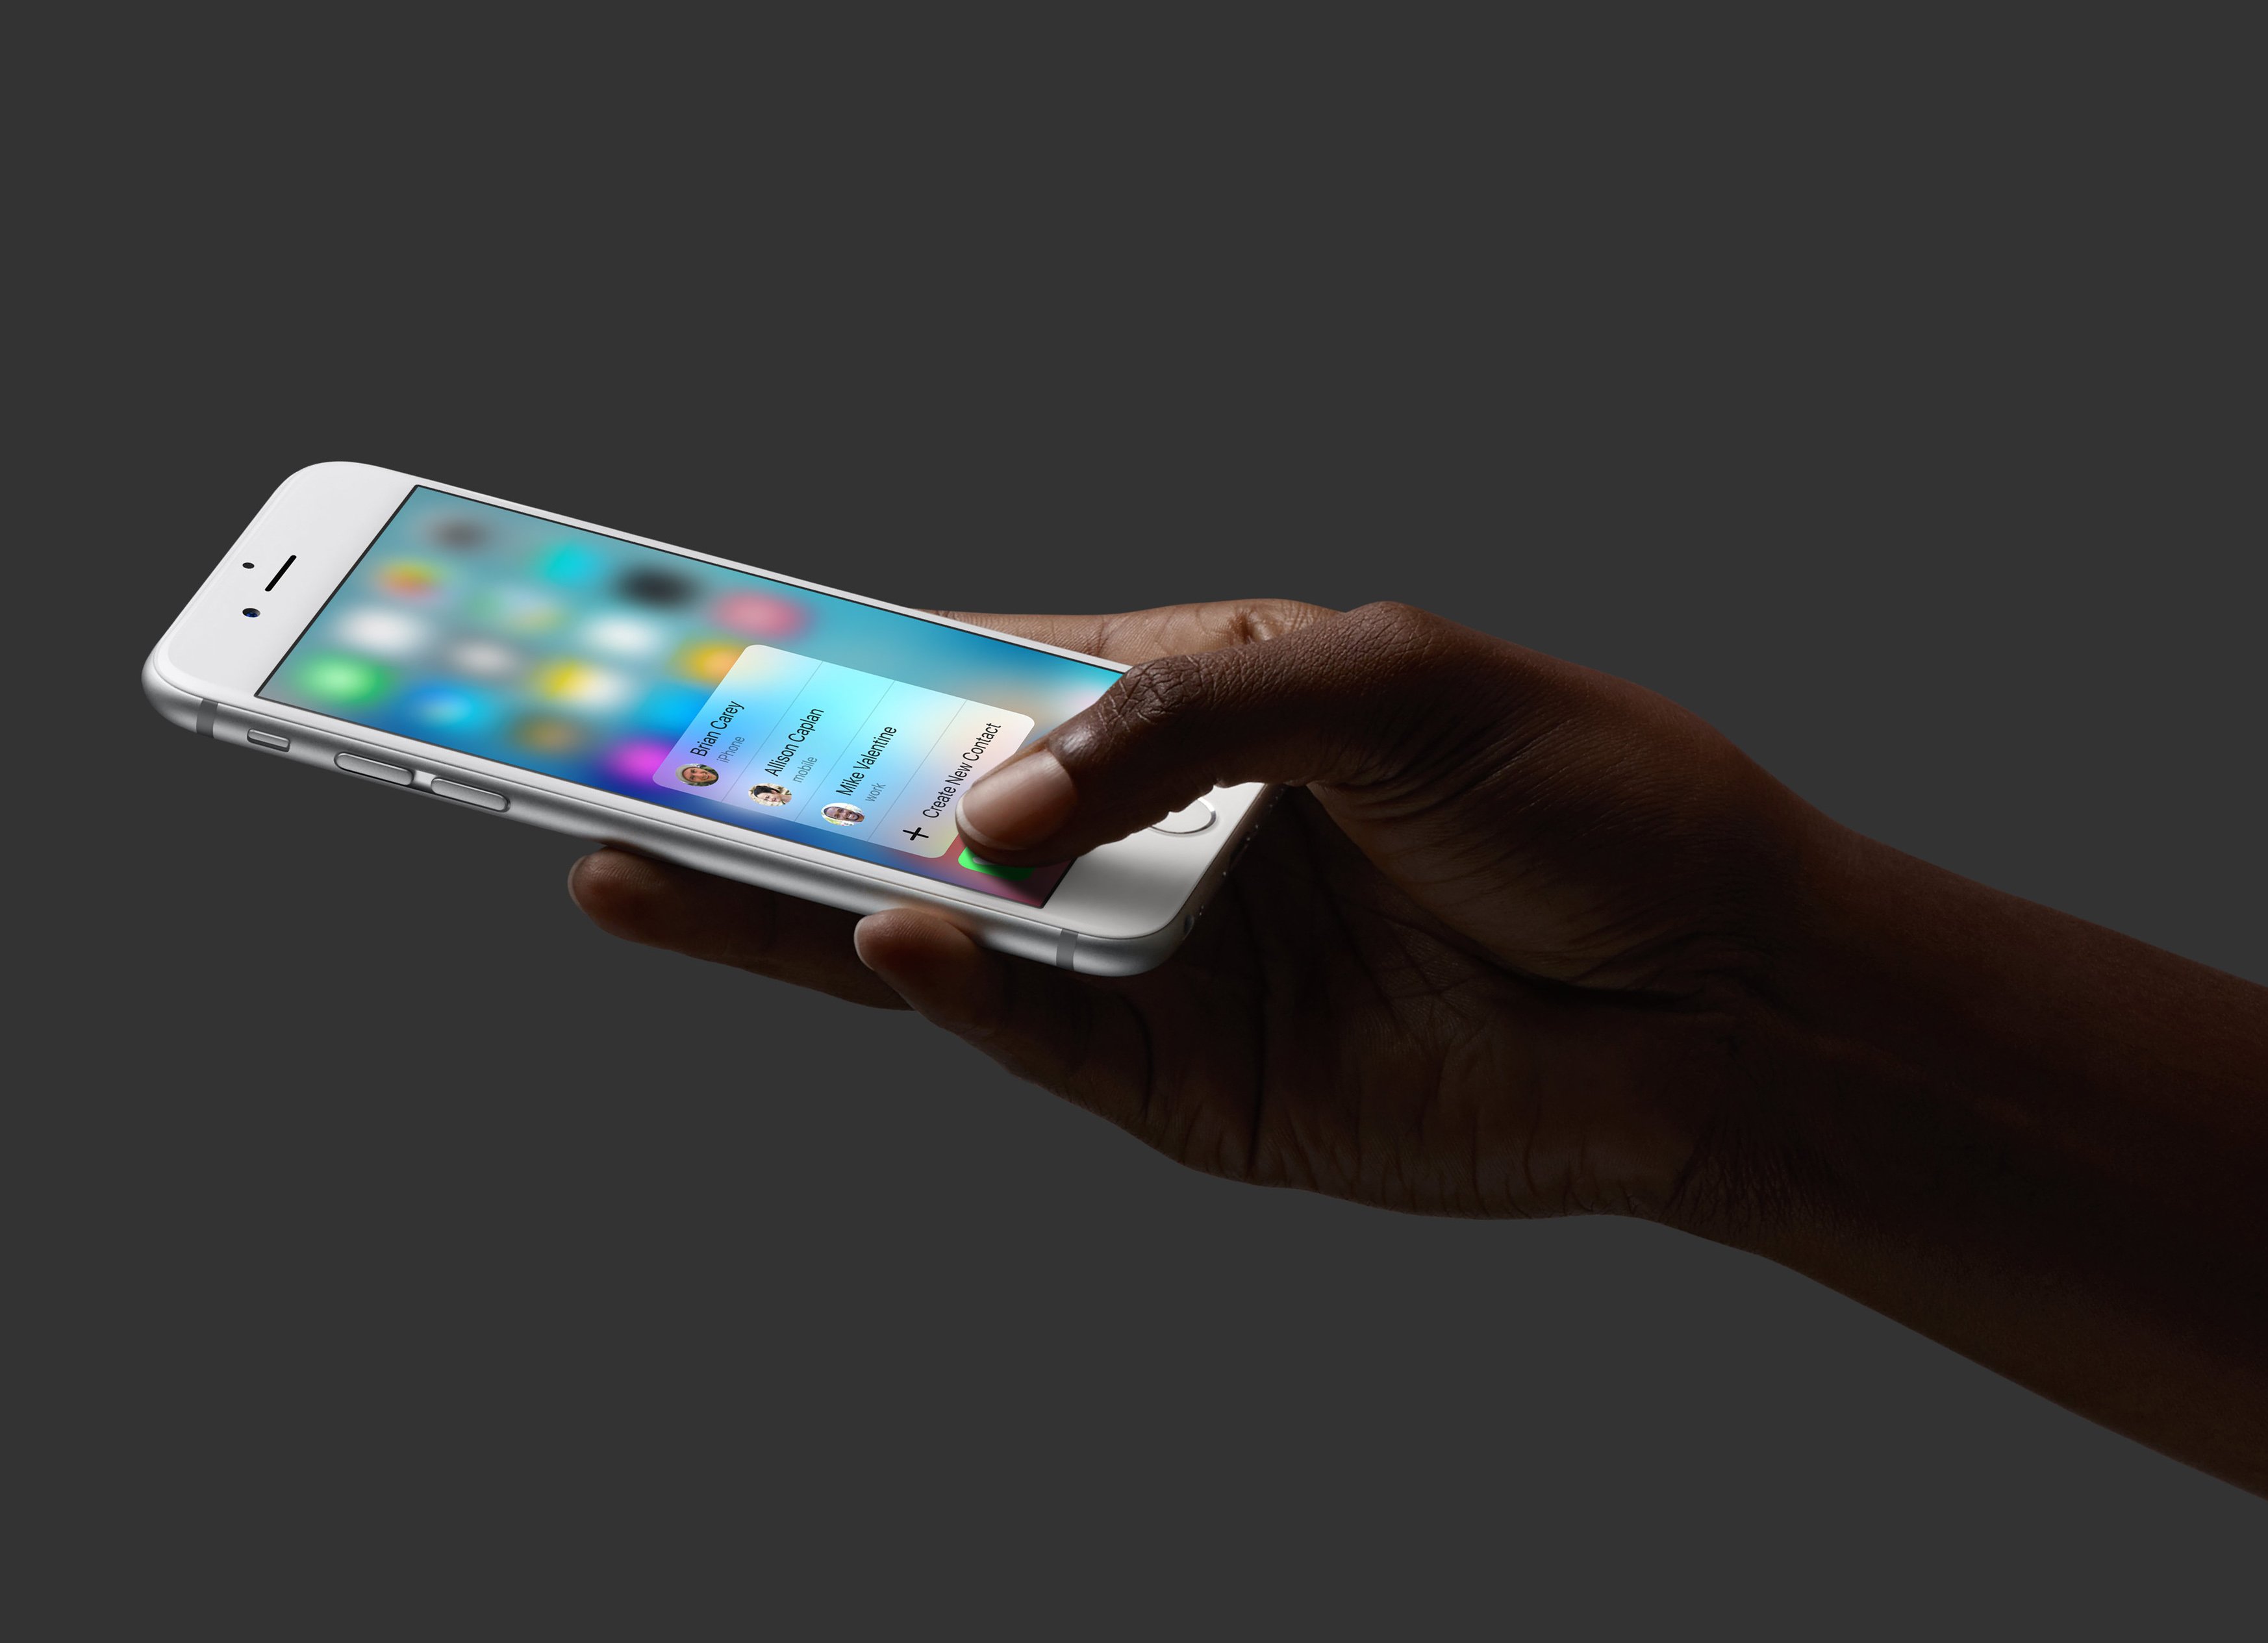 Apple iPhone 6s with 3D touch